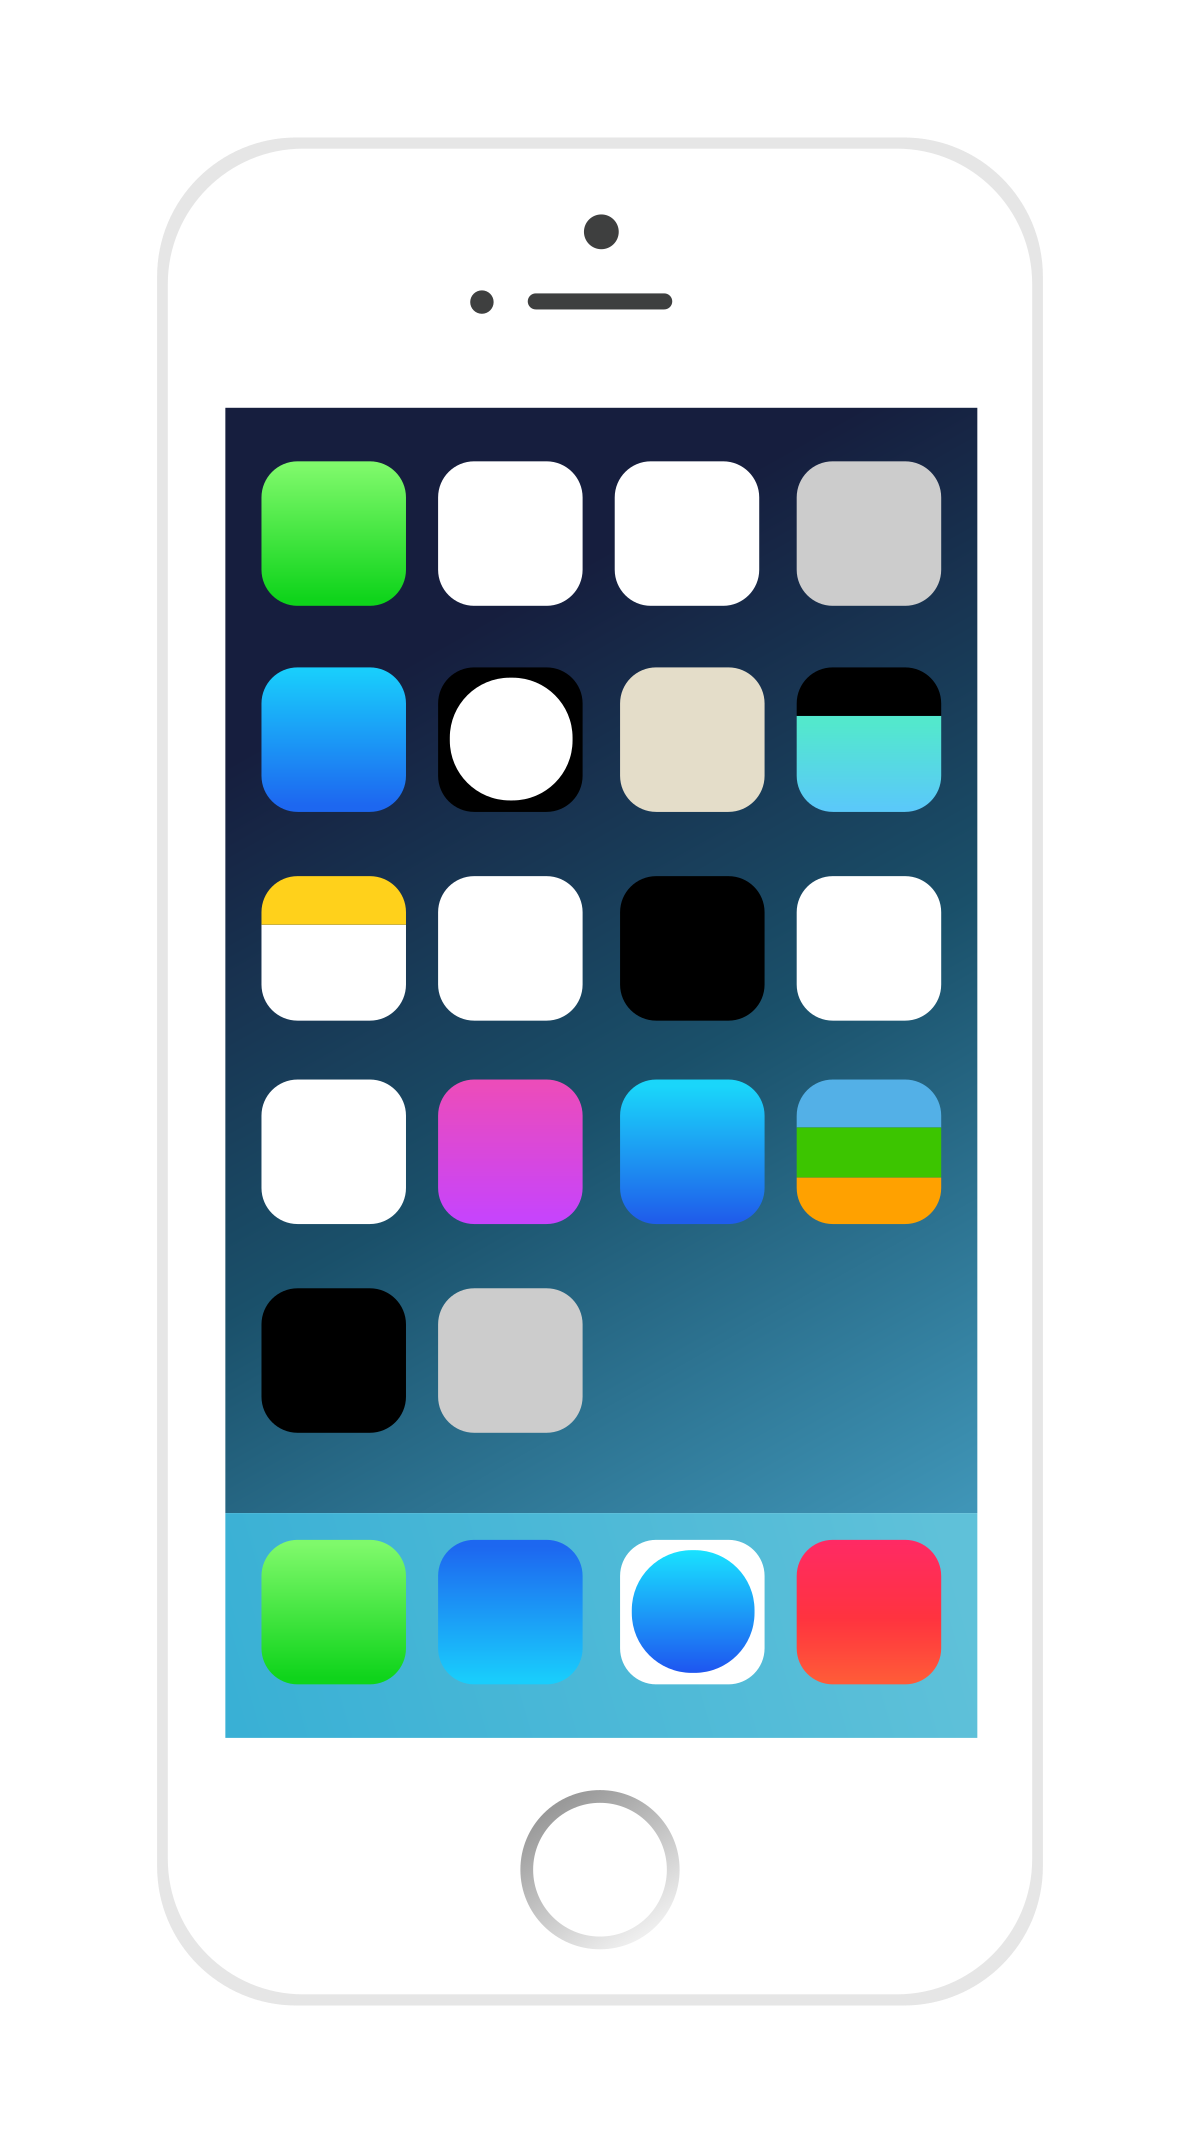 IPhone with icons.svg